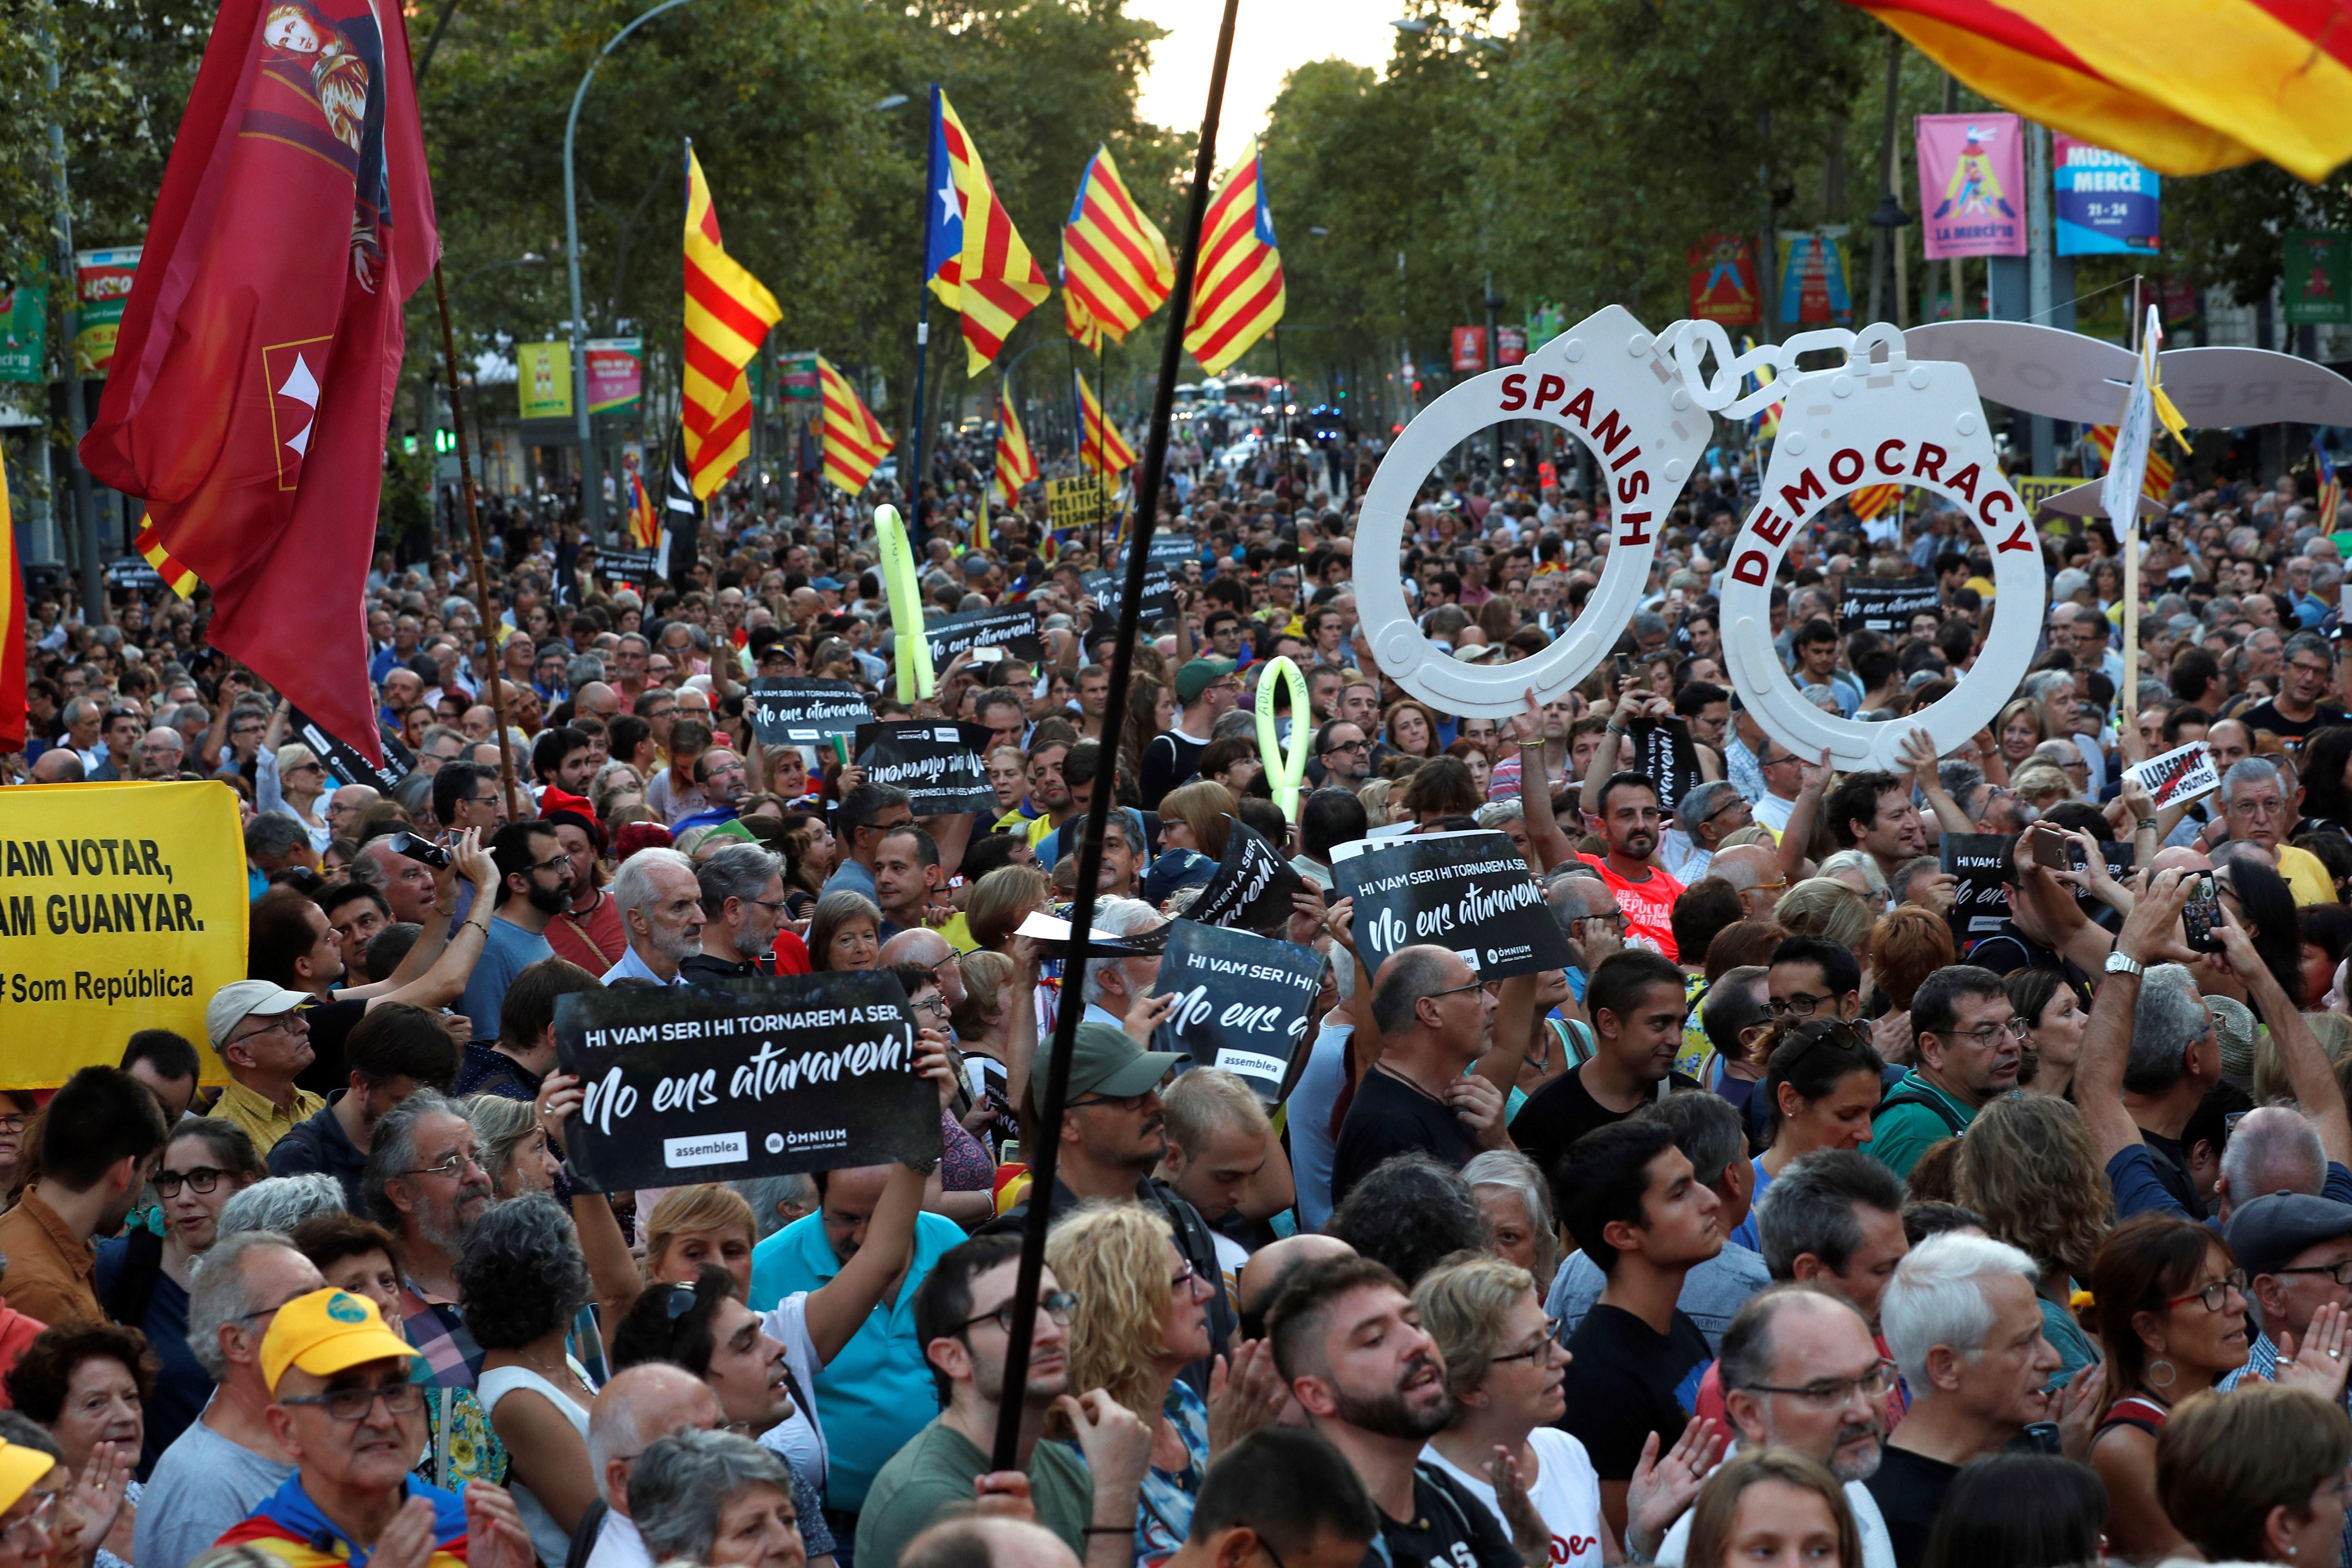 One year on, jailed Catalan activists the 'Jordis' say "We would do it again"